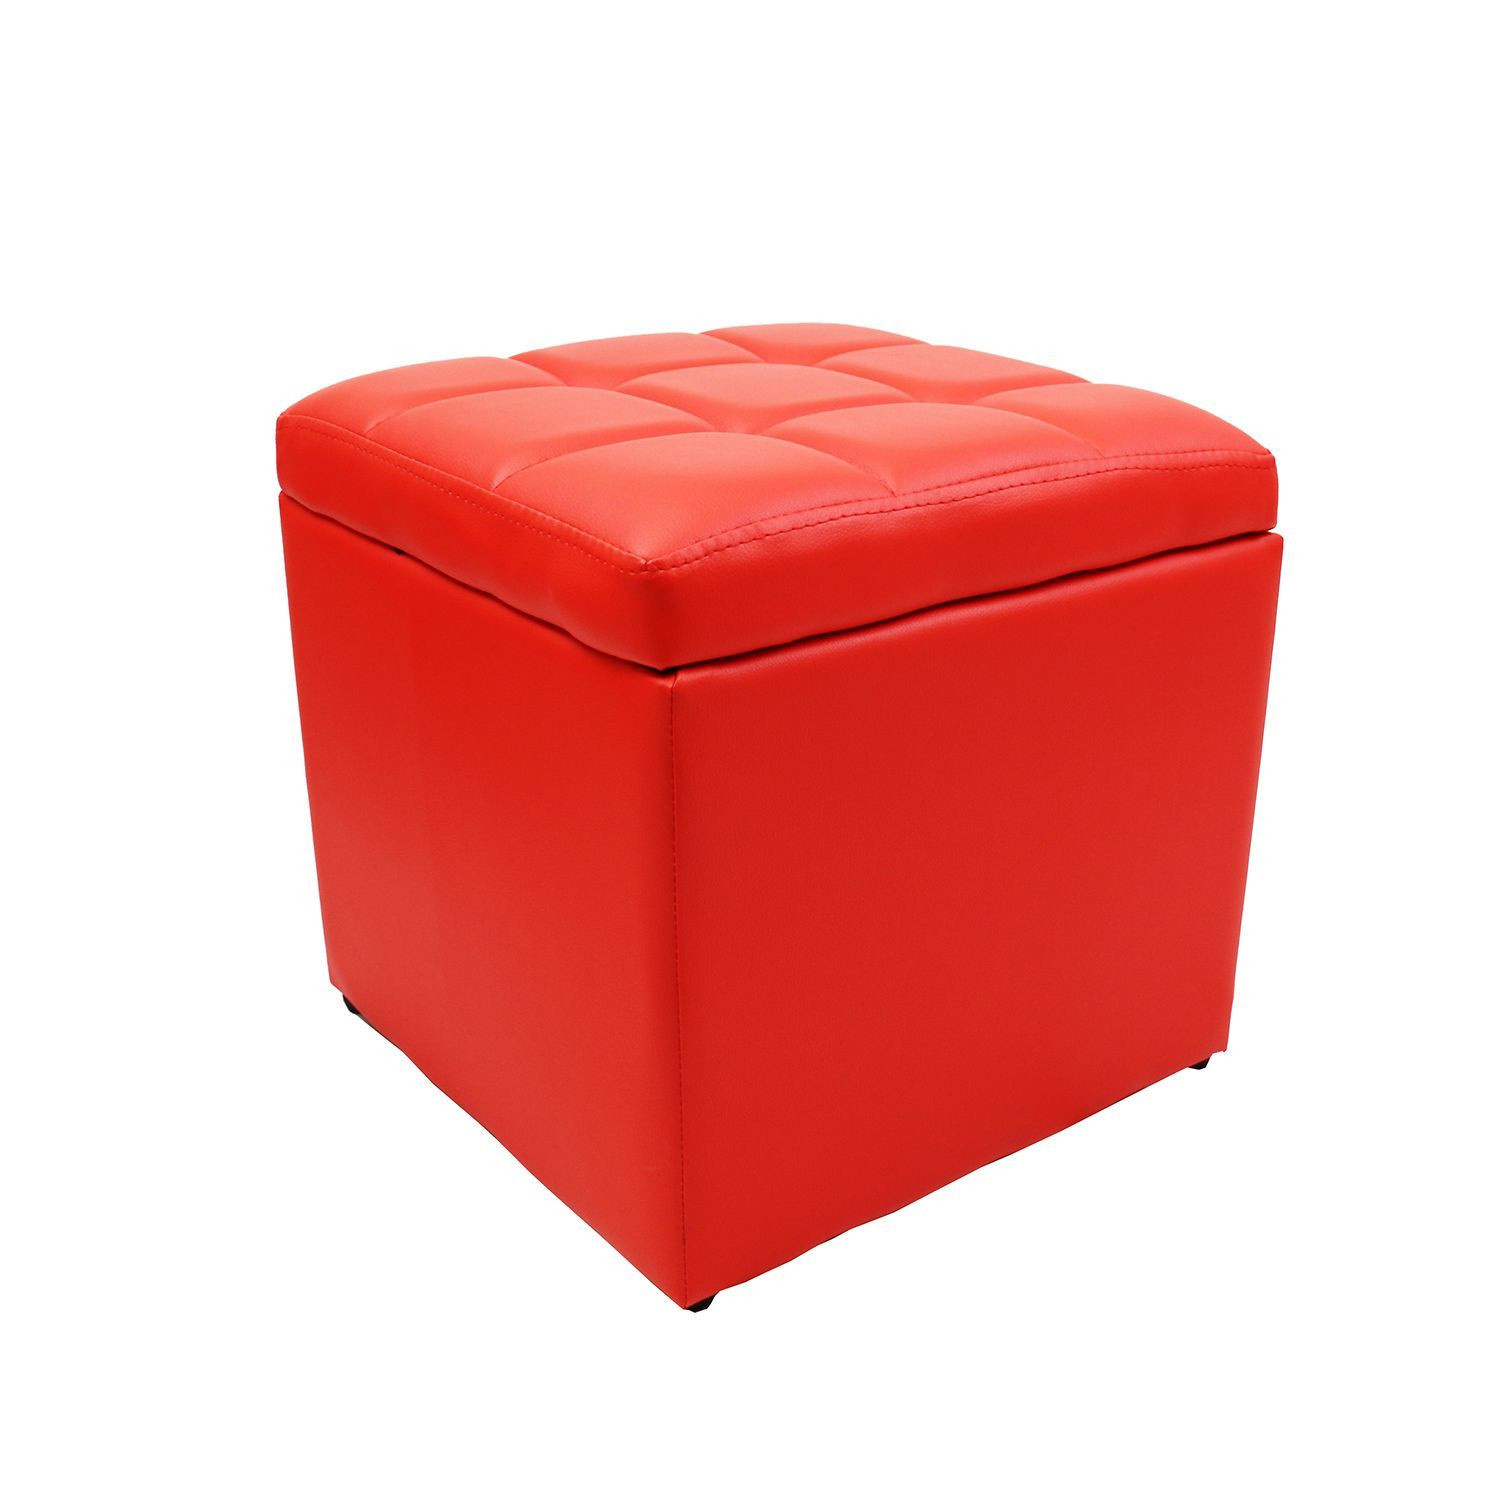 Red Storage Bench
 Living Home Decor Classic Square Cube Unfold Storage